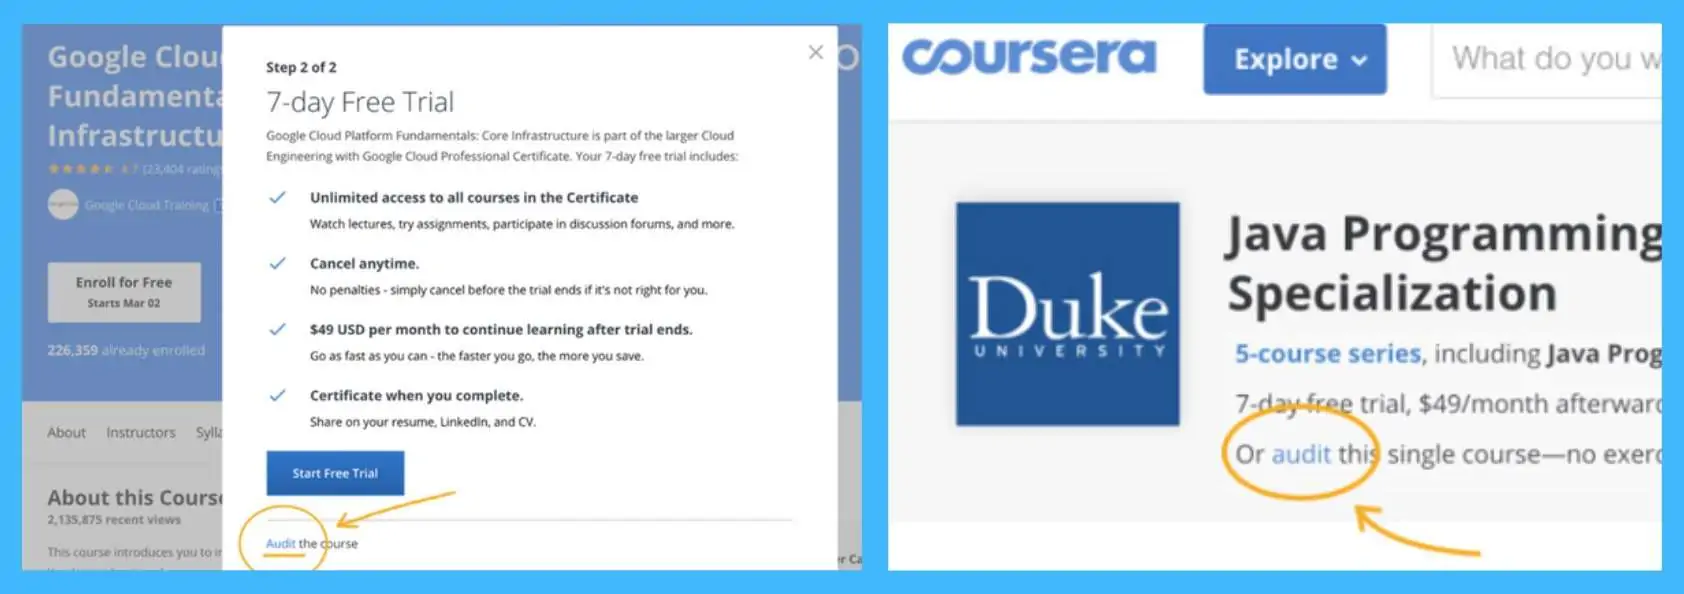 audit this course coursera